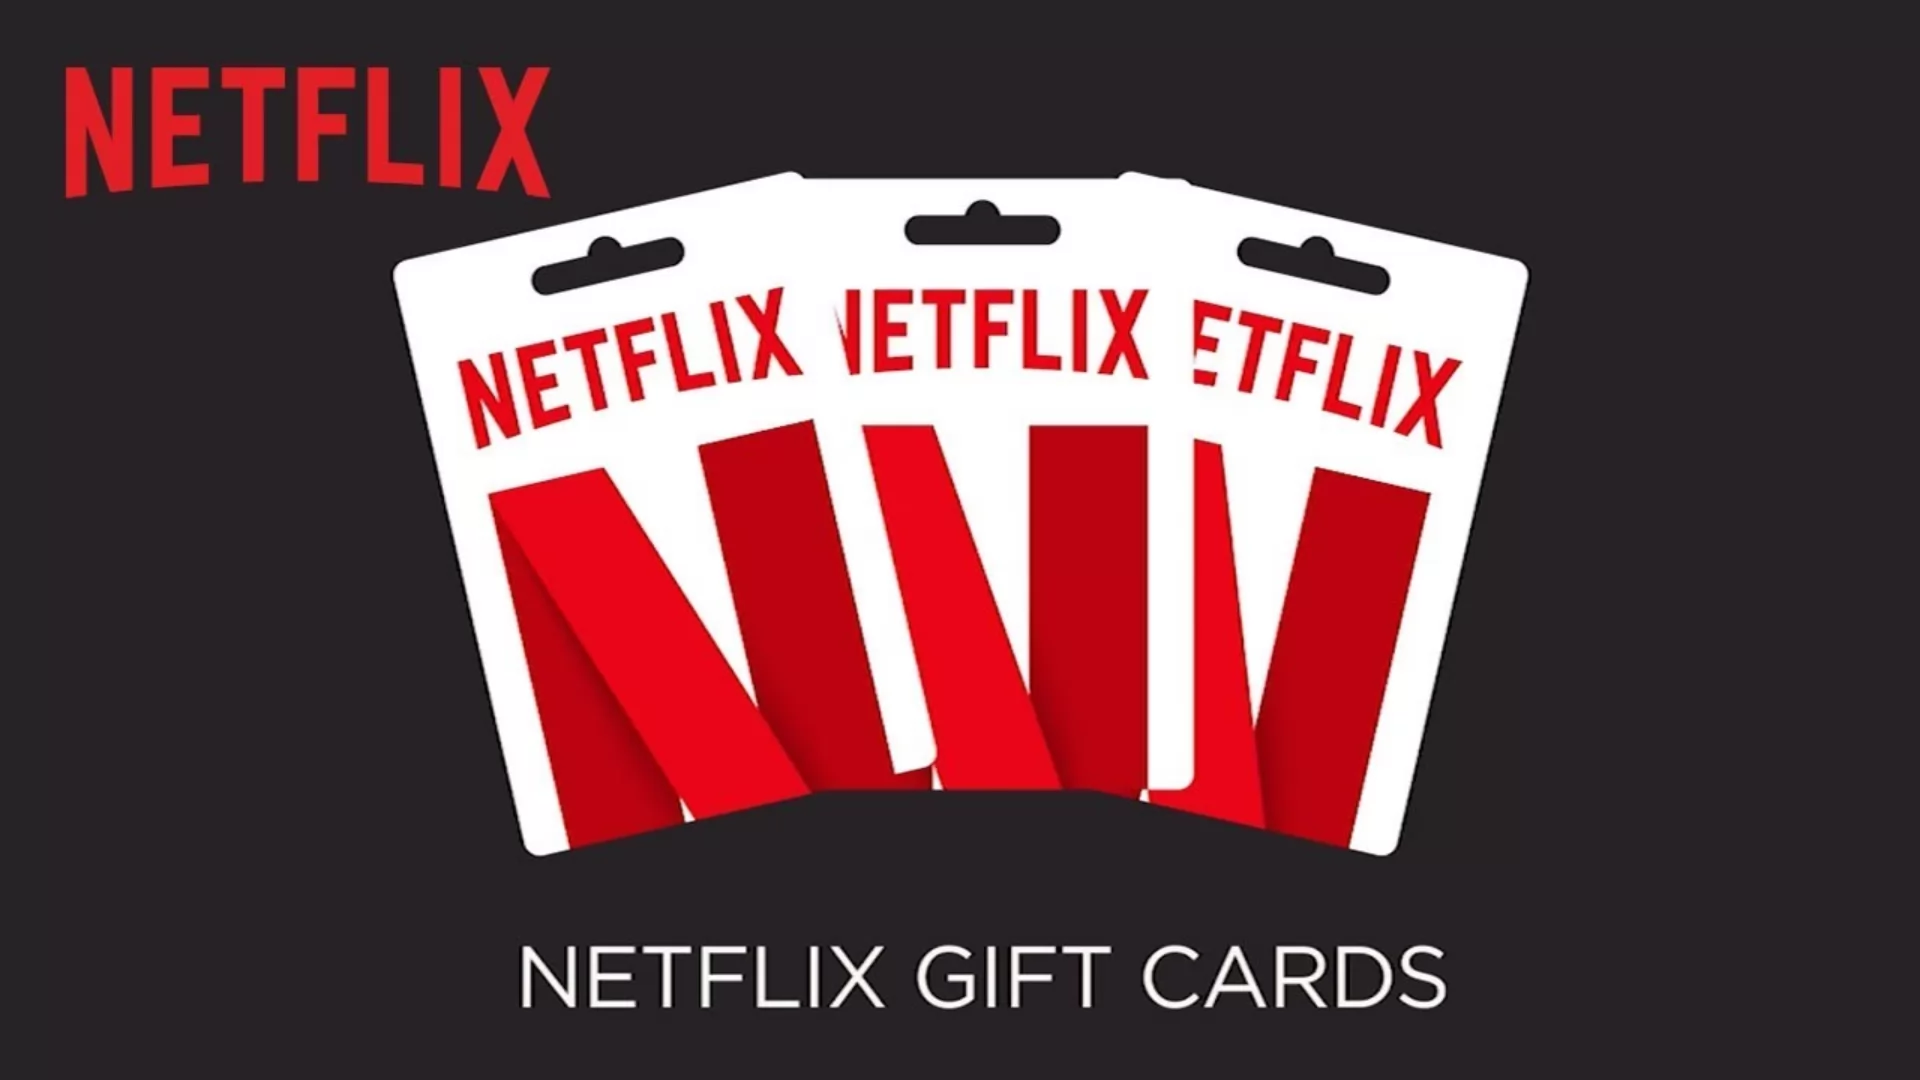  How To Get Netflix Subscription For Free With Netflix Giftcard?